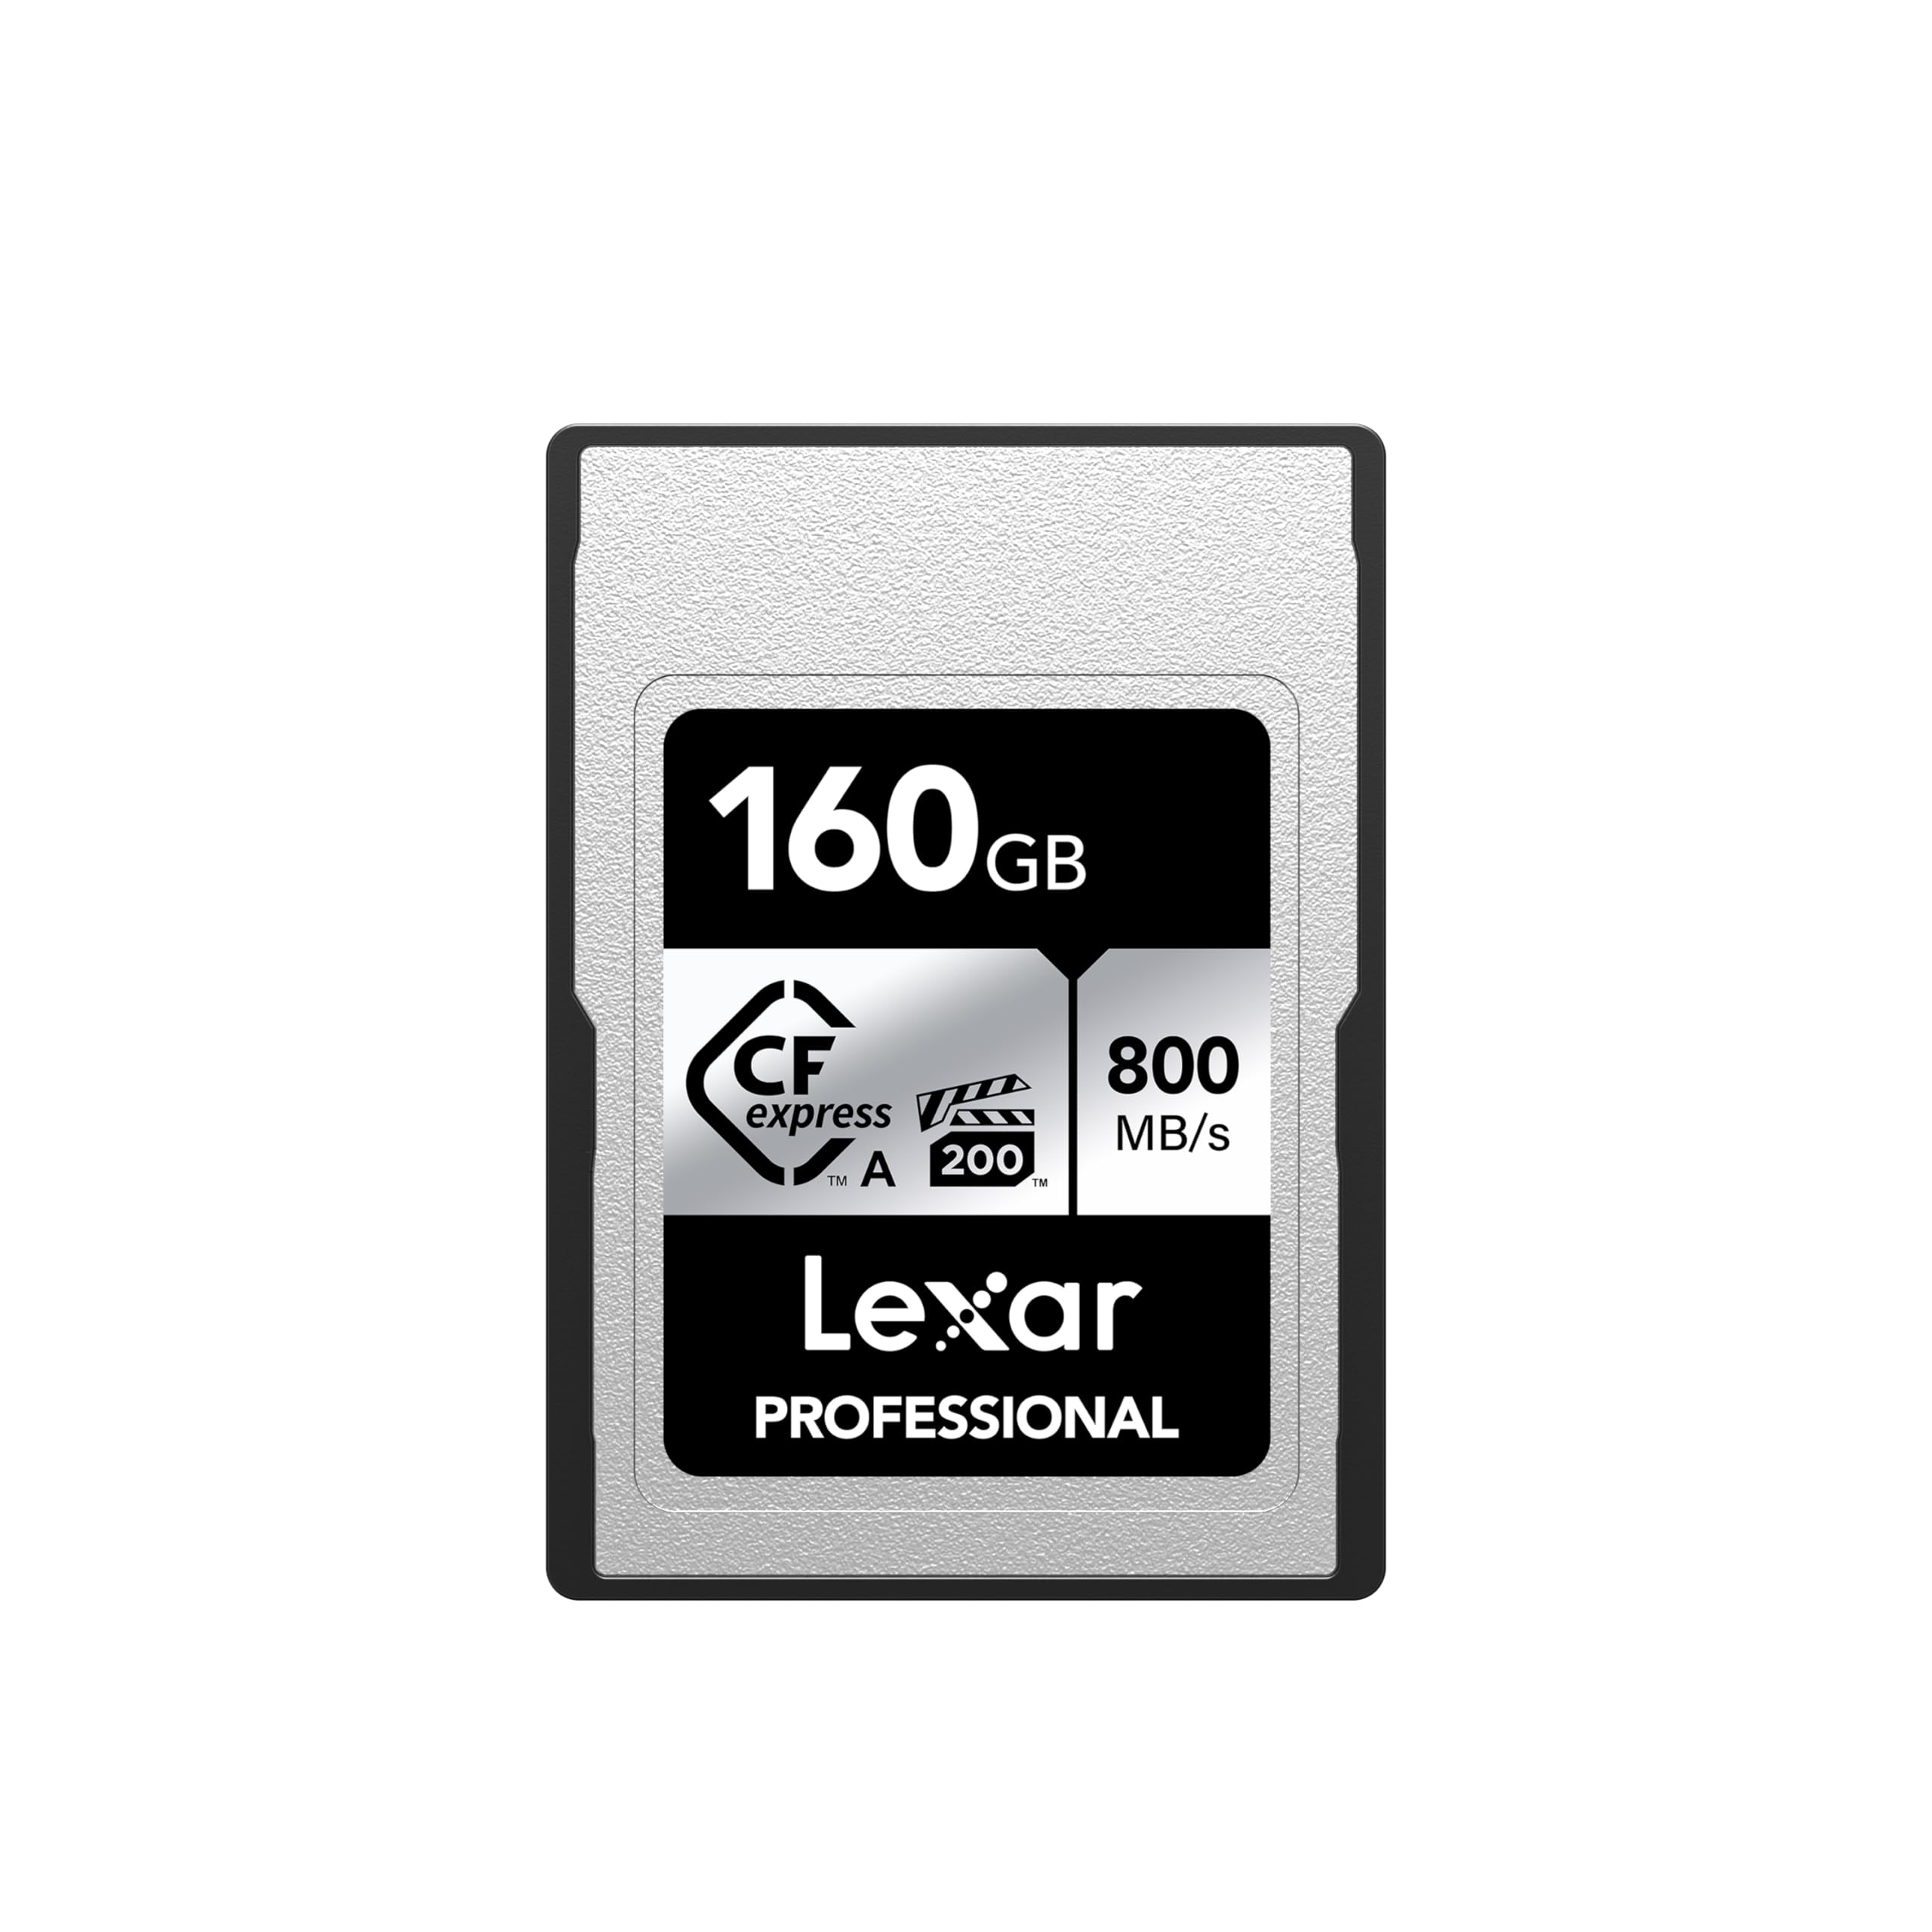 Lexar Professional 160GB CFexpress Type A Silver Series Memory Card, Compatible with Sony Cameras w/Type A Card Slot, Up to 800MB/s Read & 700MB/s Write, 8K Video, VPG 200 (LCAEXSL160G-RNENG)